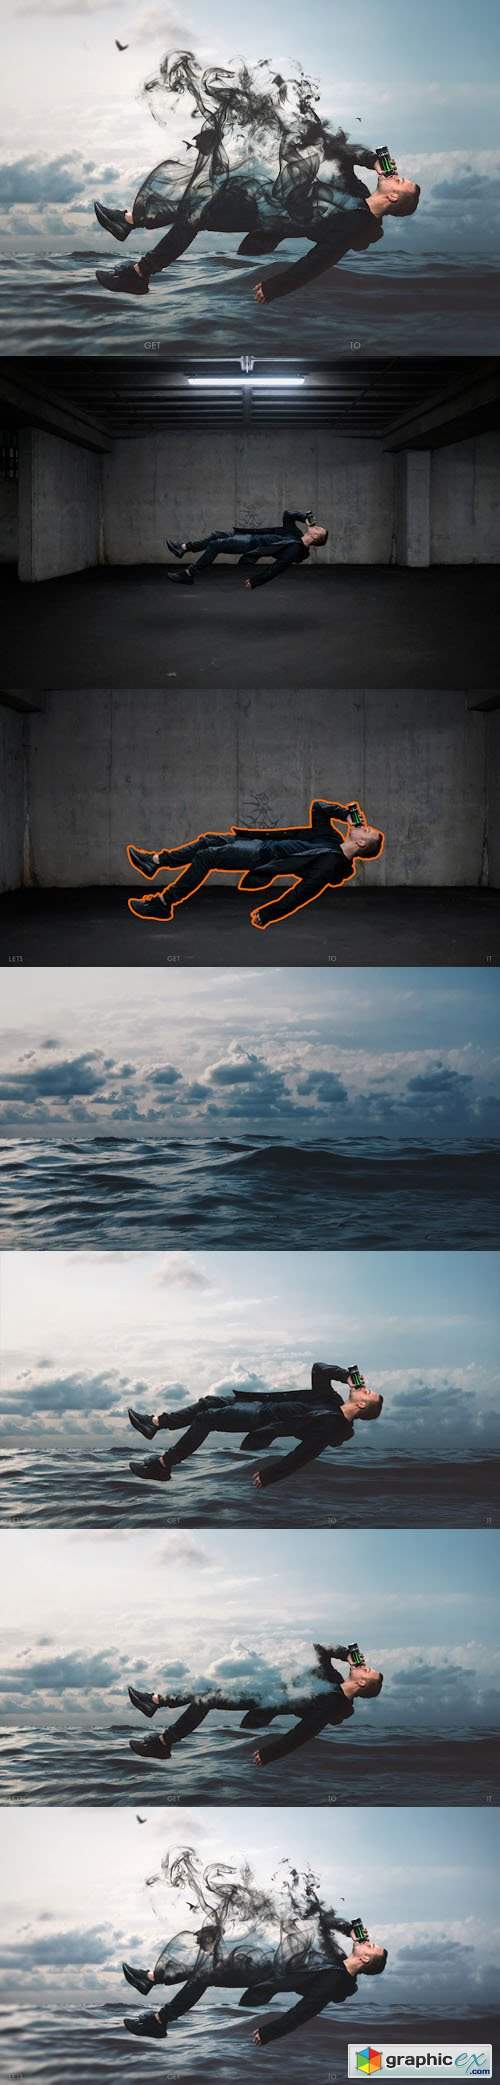  Floating Man With Smoke Over The Sea - Awesome Photoshop Manipulation + Tutorial 